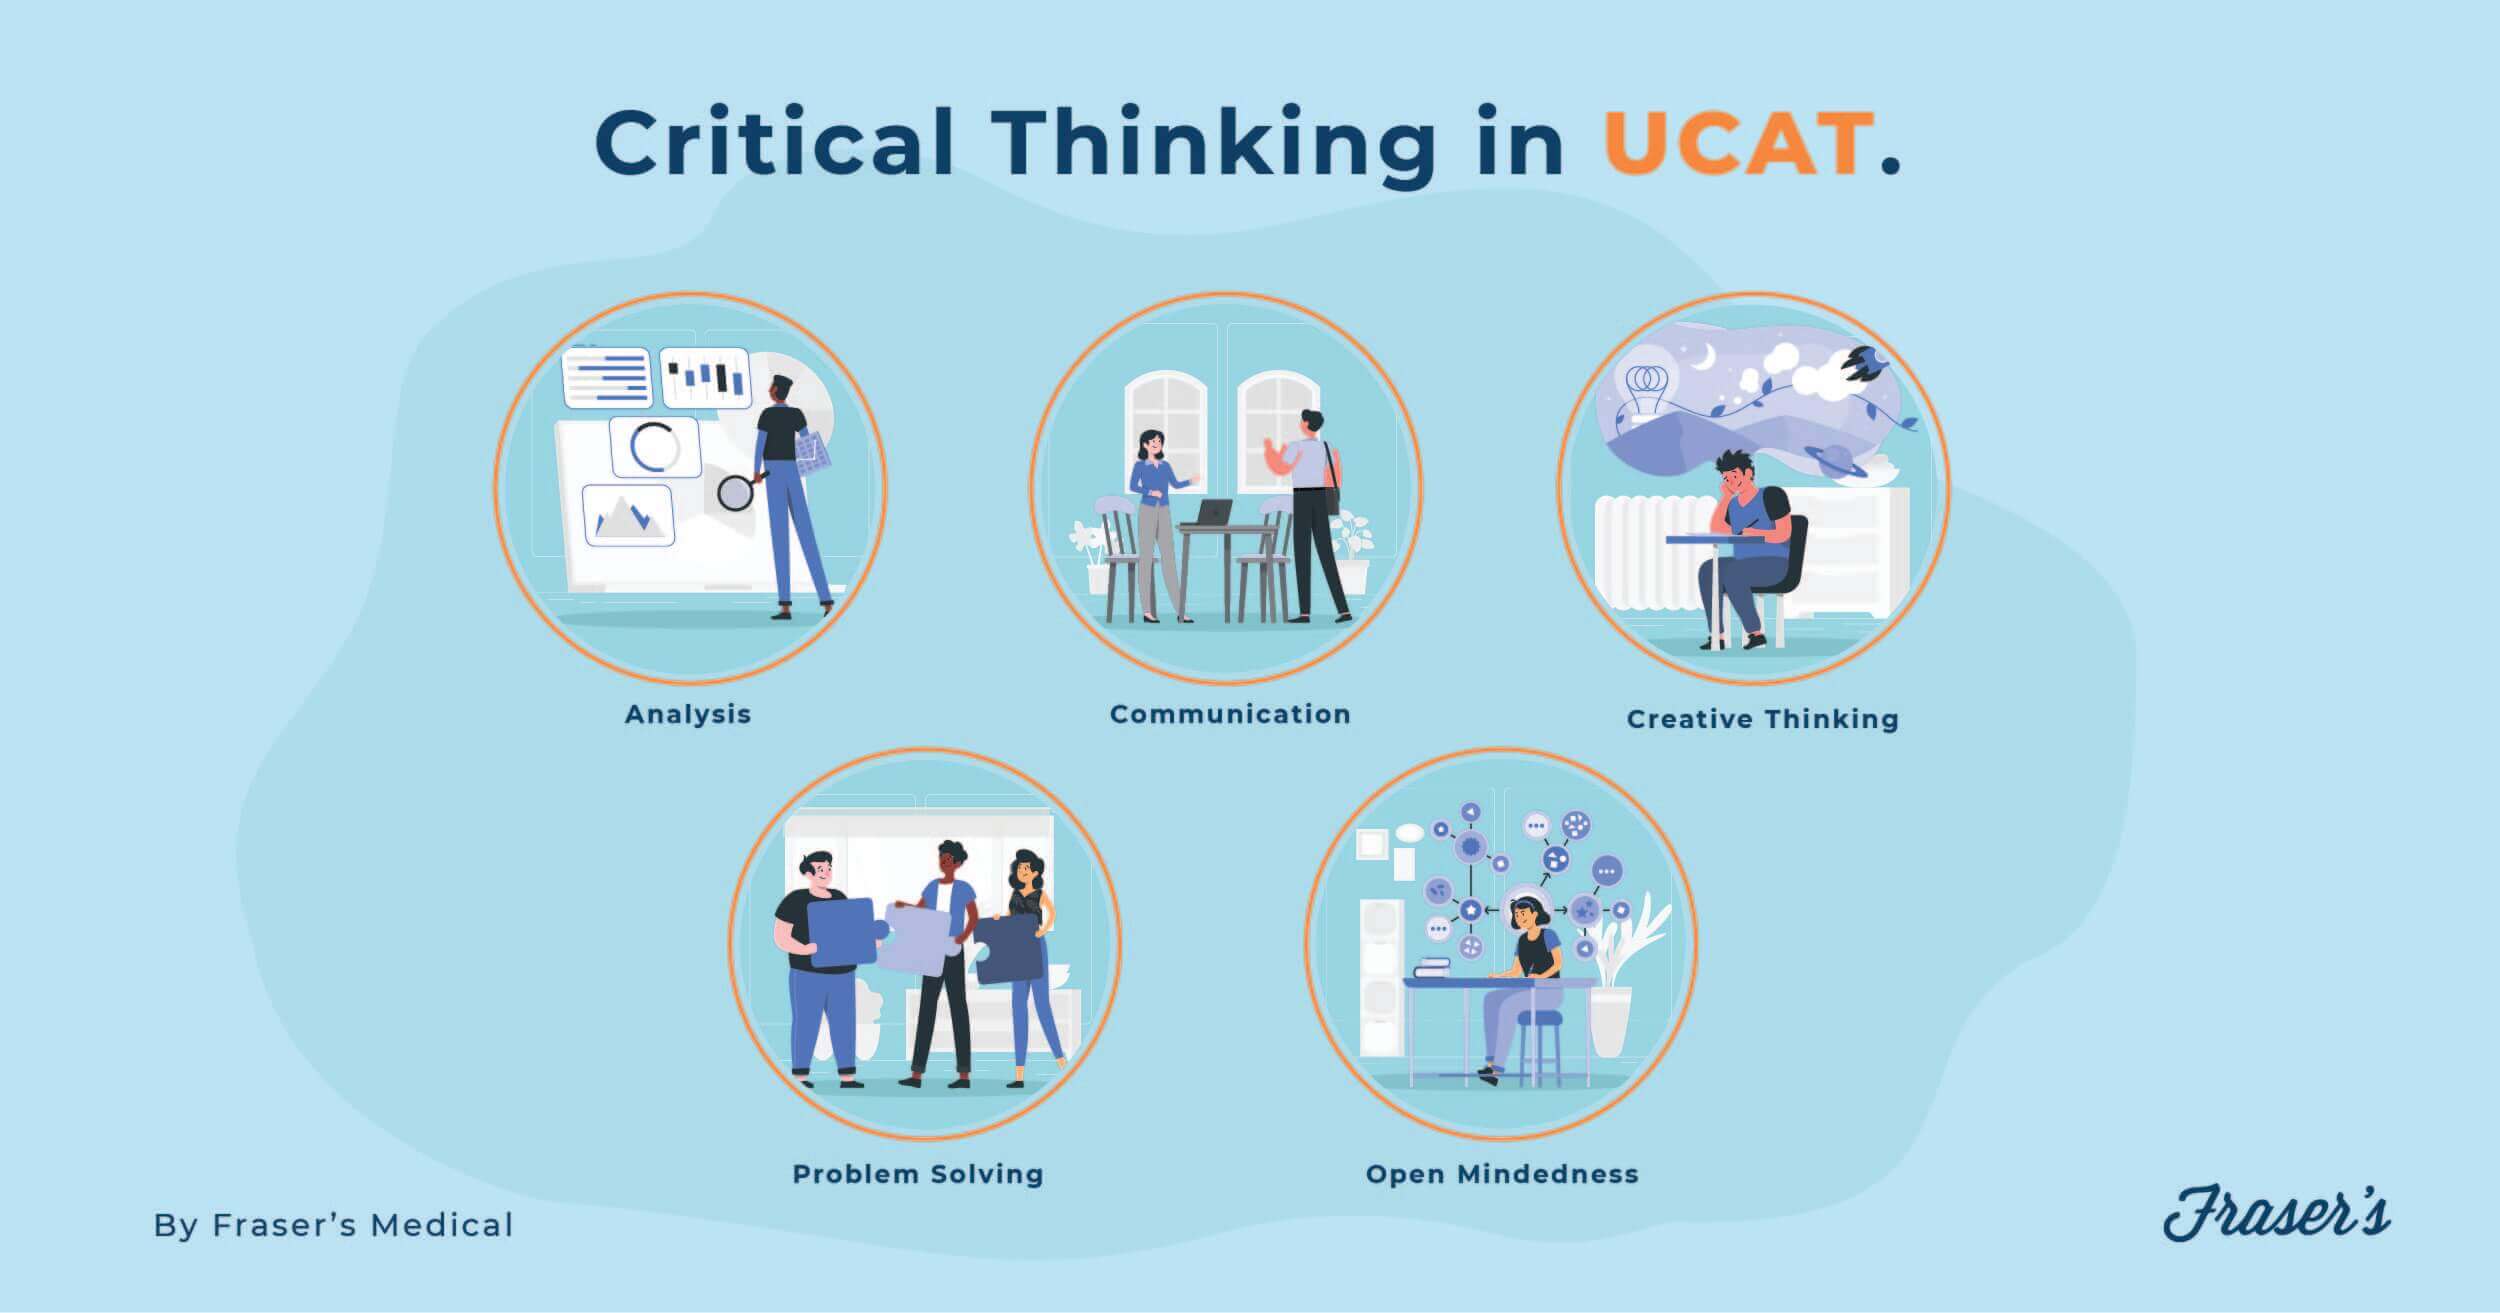 Critical thinking in the UCAT exam